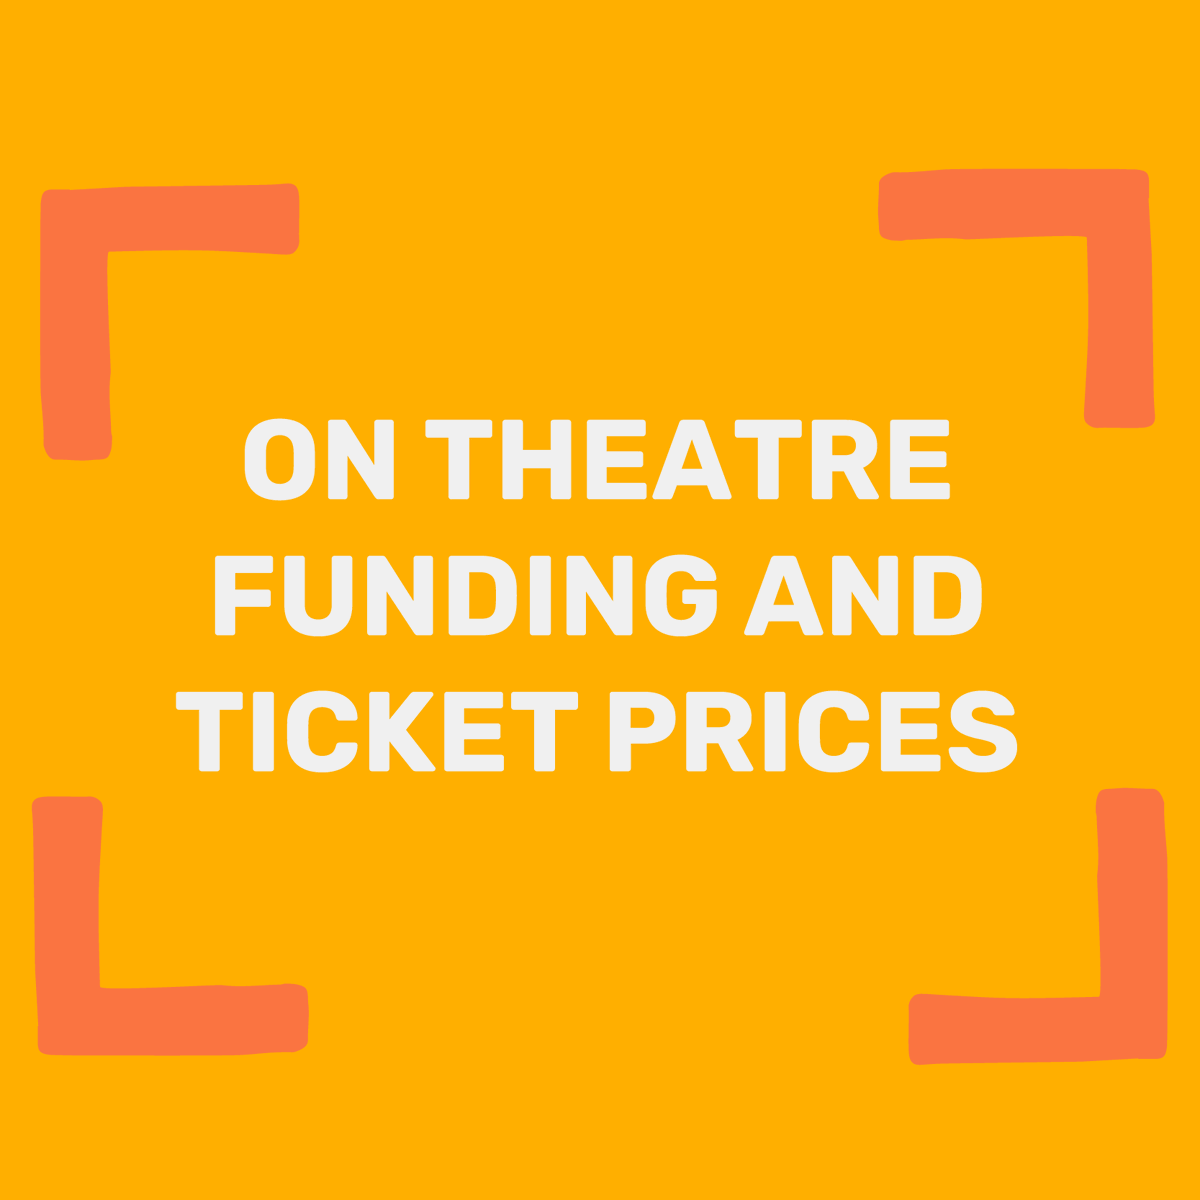 💷 The cost of our new show is £89,571.04 💷 Our funding covers £70,071.04 💷 Leaving £19,500 to make at box office Which makes it hard for us to offer truly affordable tickets. New blog: bit.ly/49wwTvq